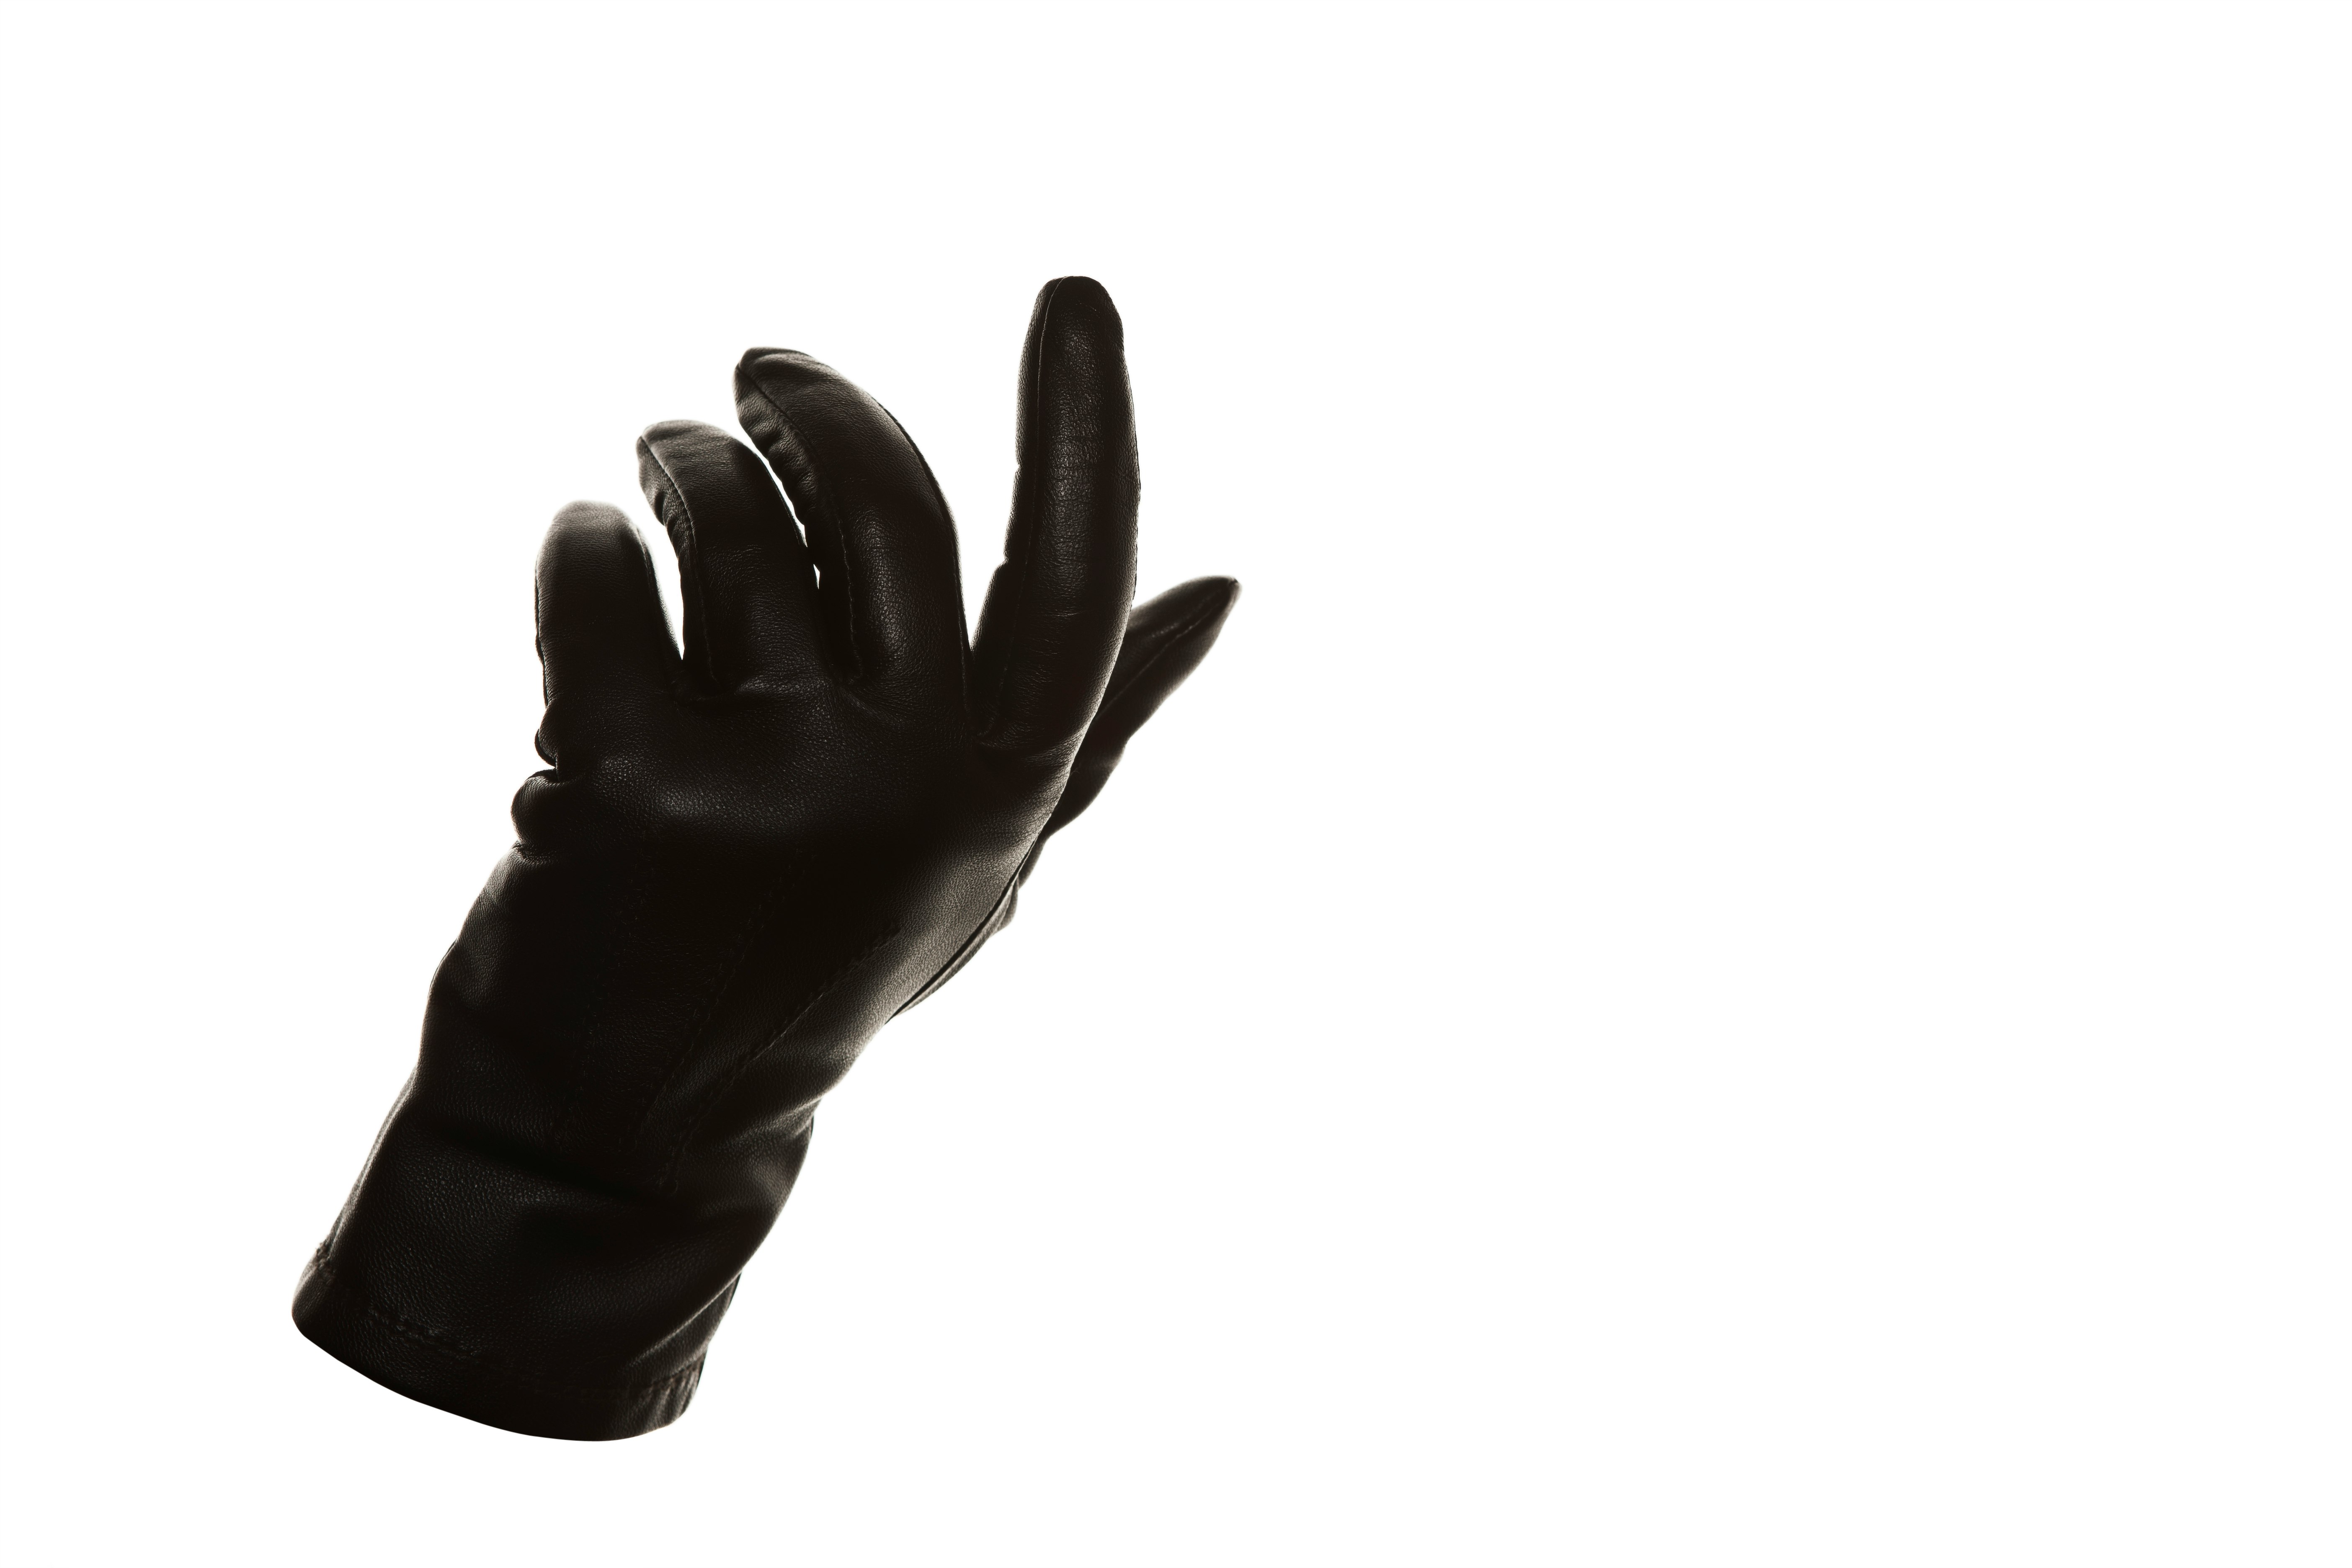 persons hand with black background